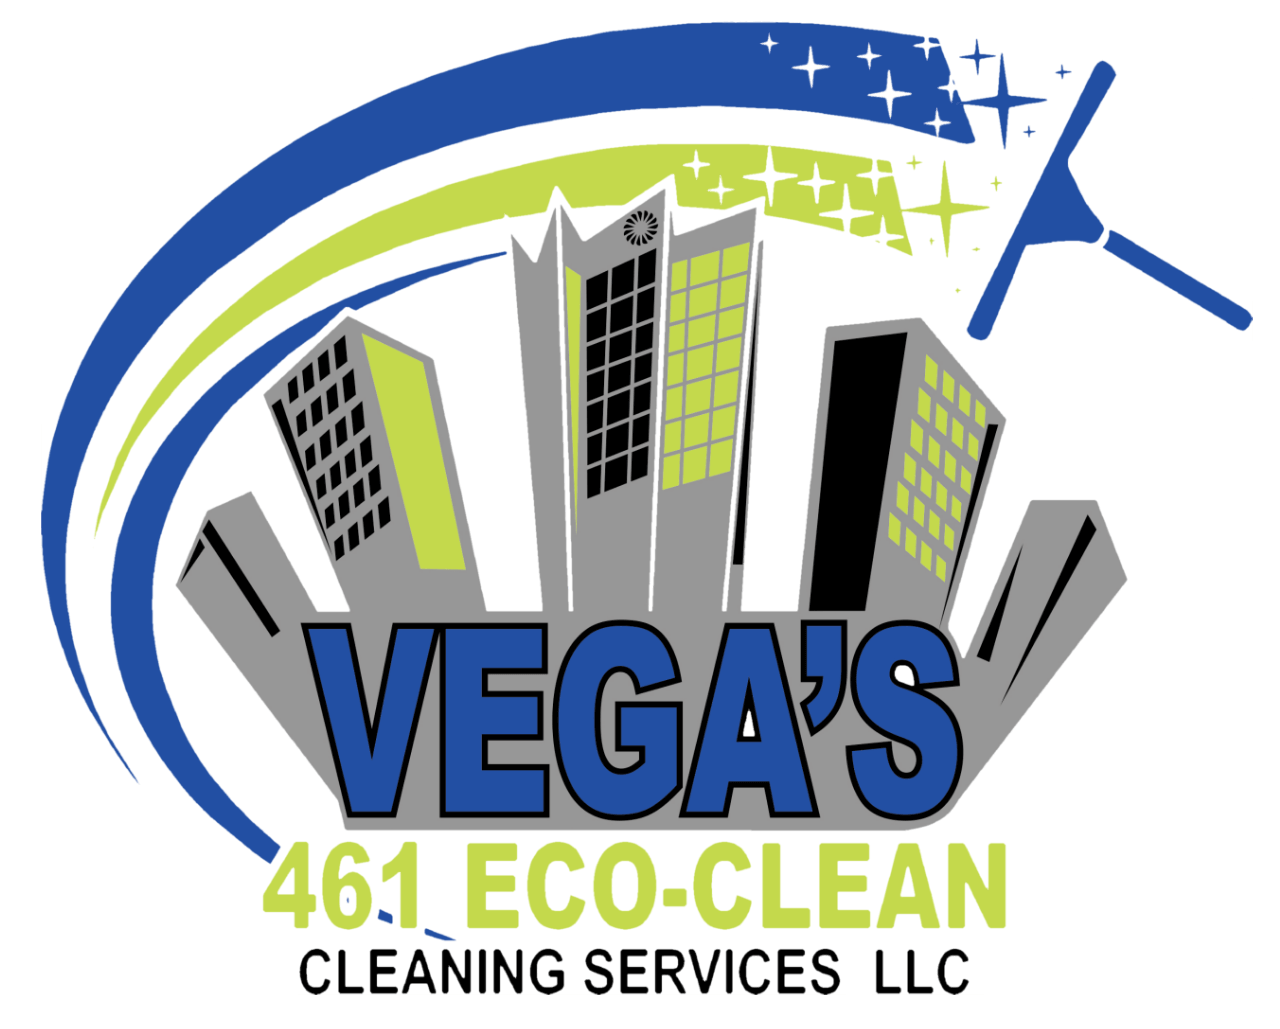 461 Eco-Clean